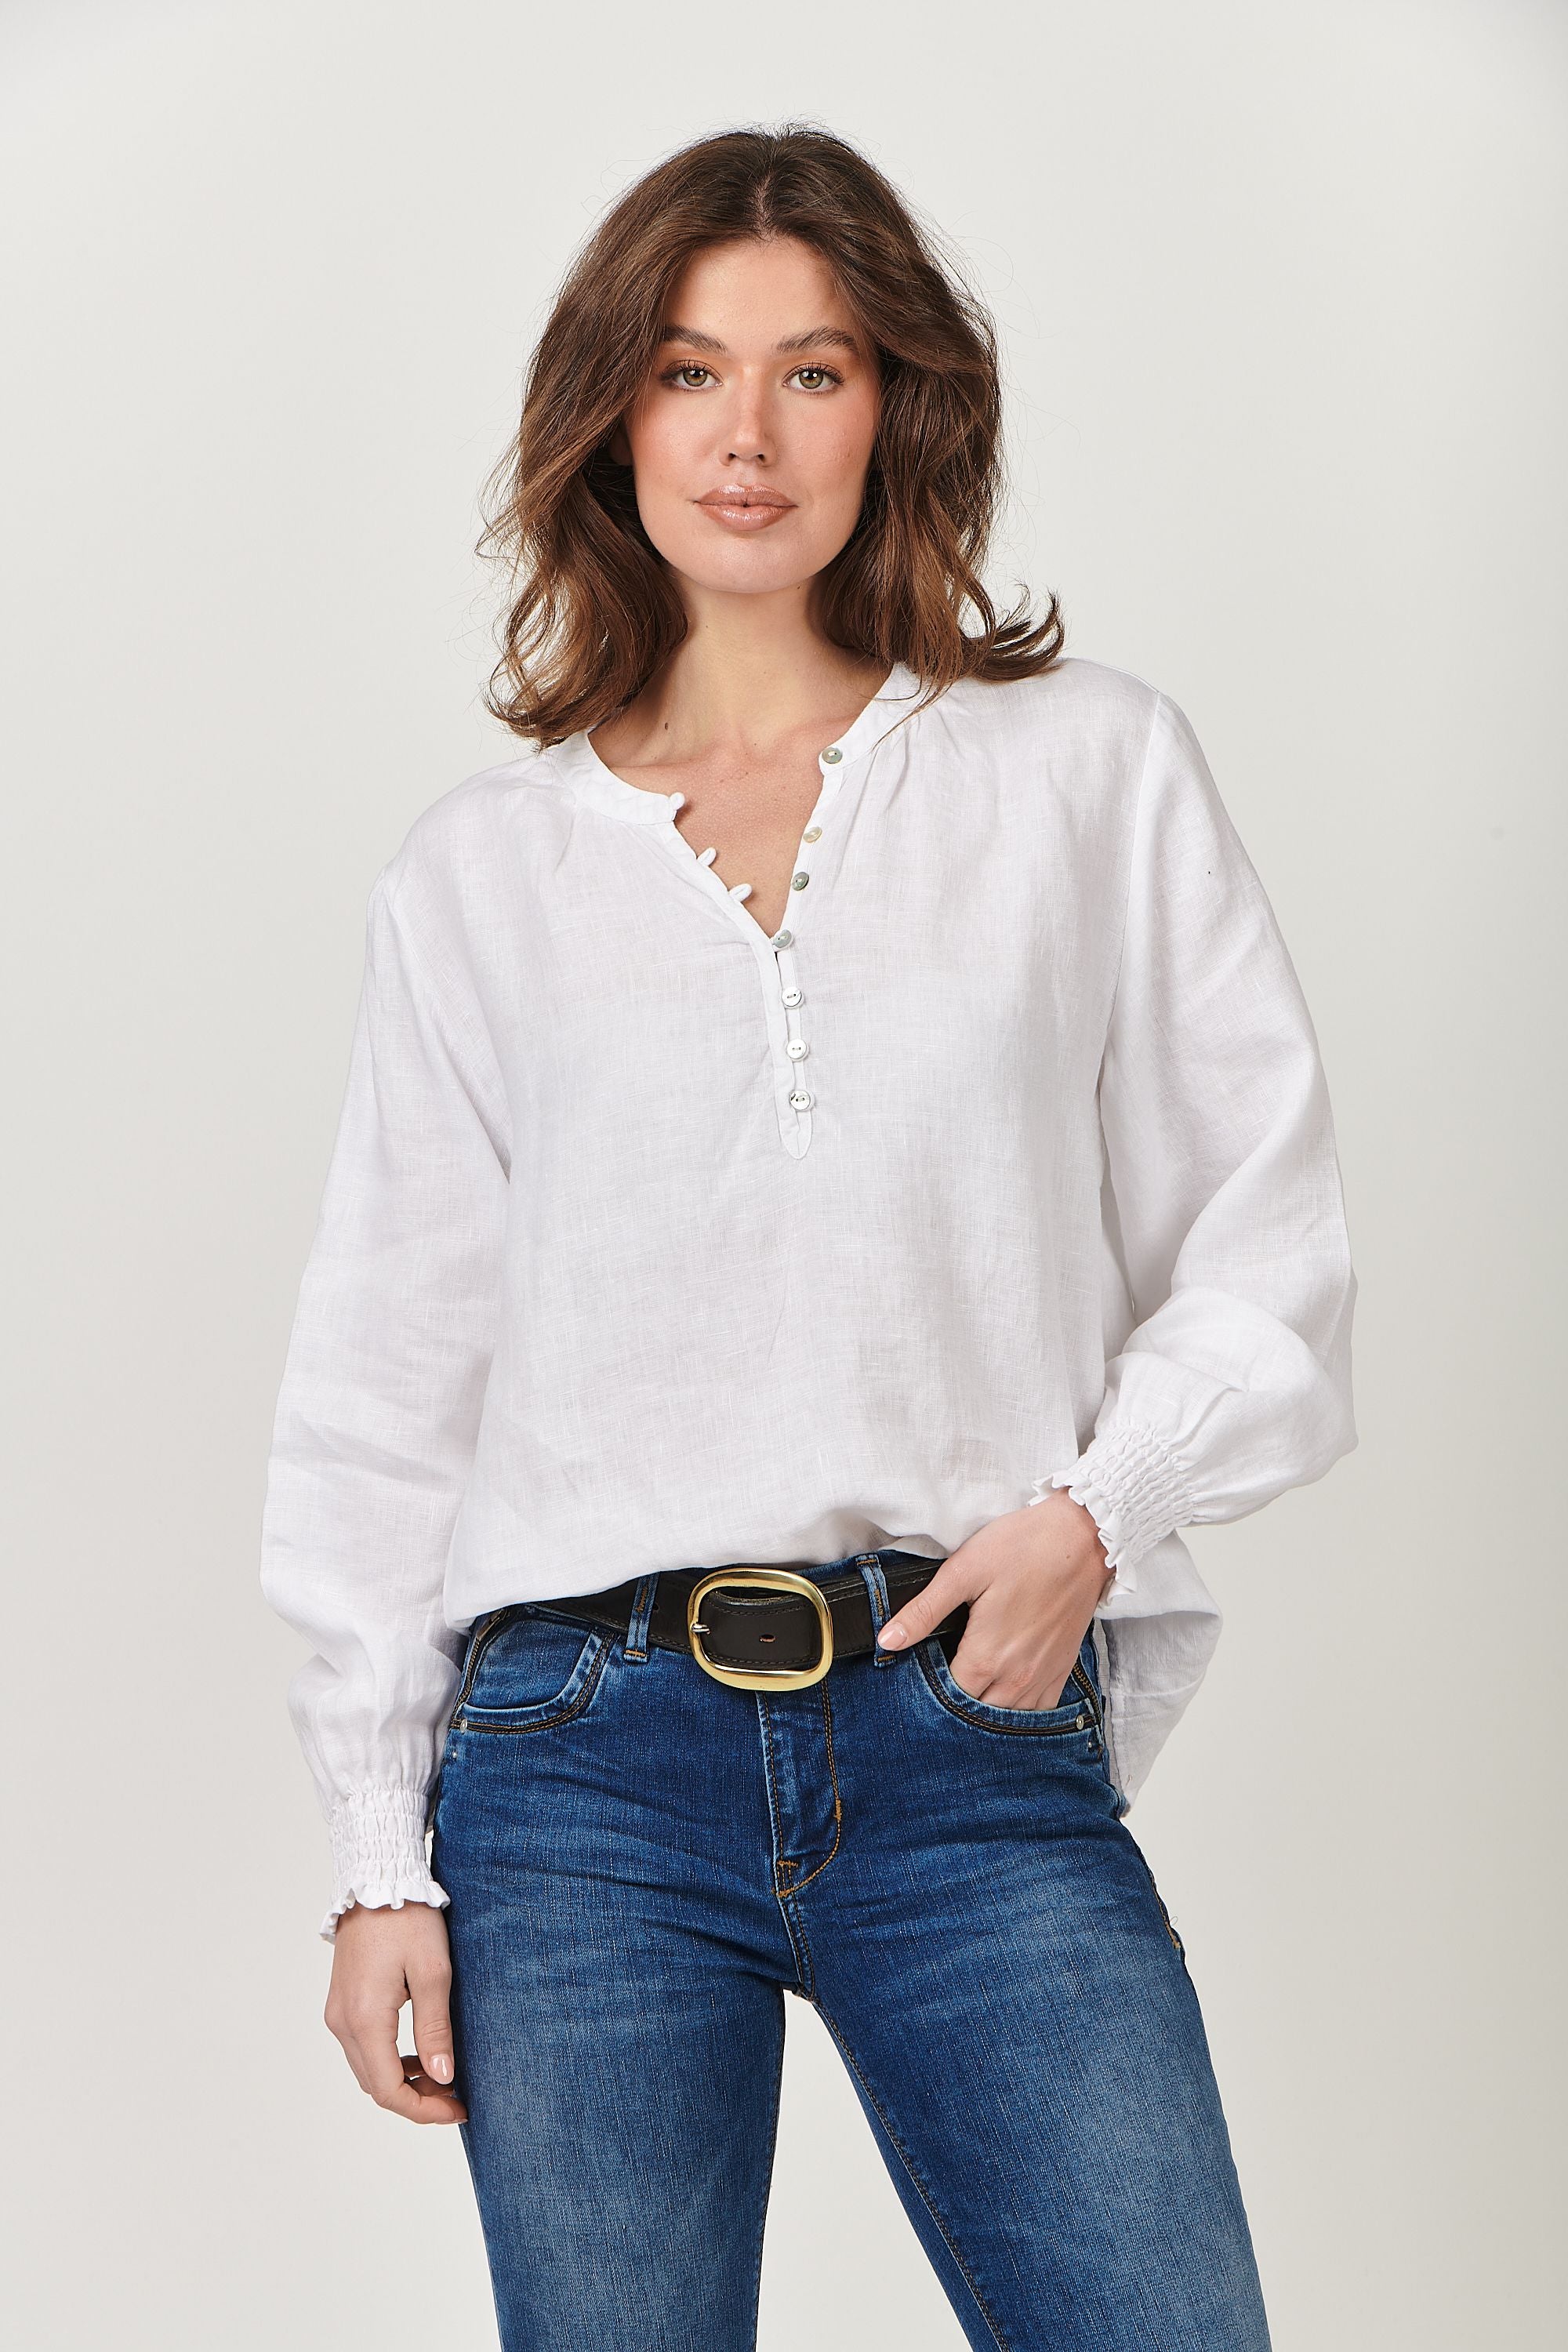 Naturals by O&J - Long Sleeve Linen Top White